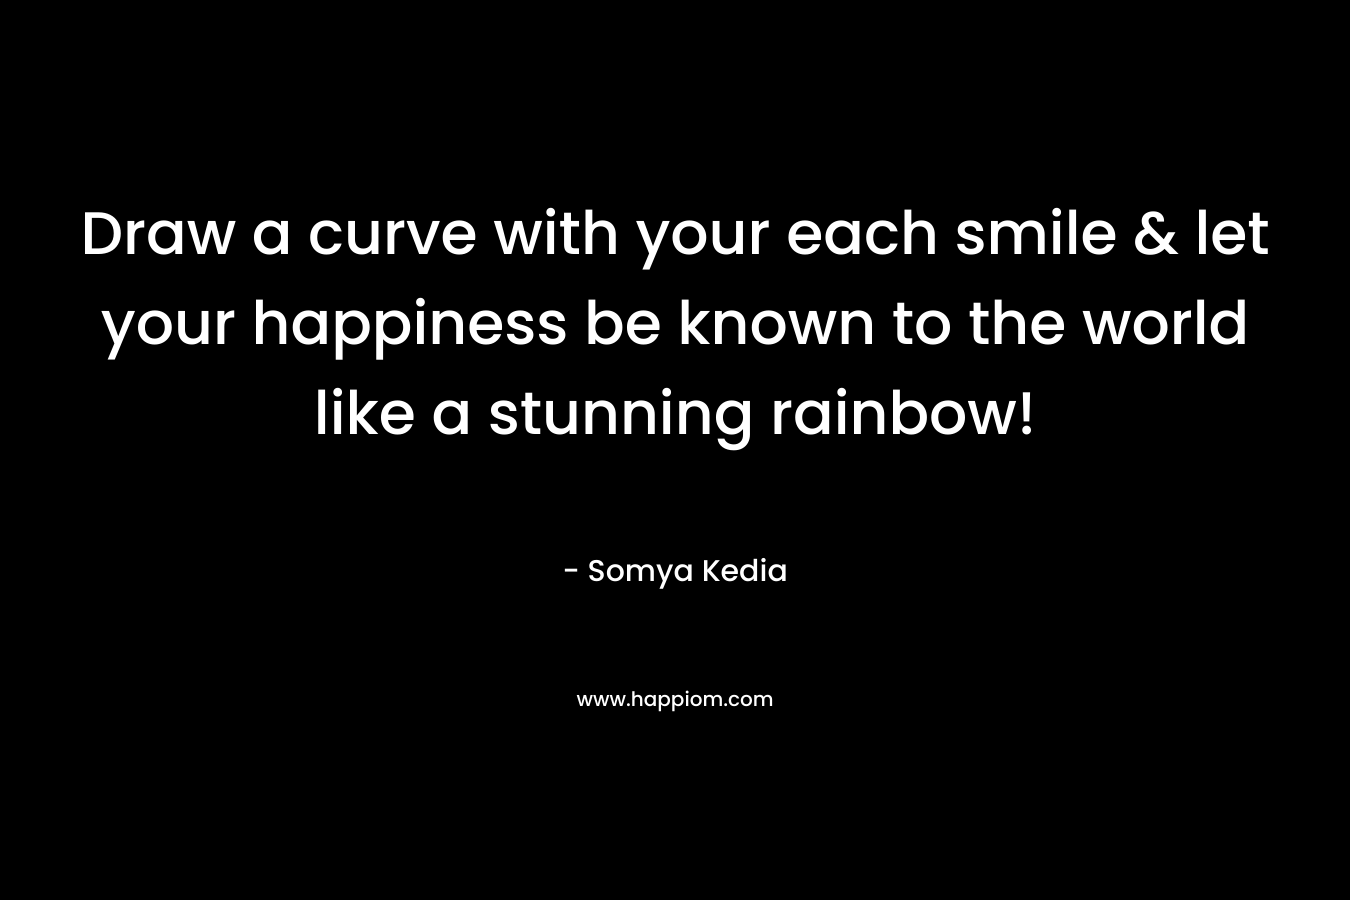 Draw a curve with your each smile & let your happiness be known to the world like a stunning rainbow!